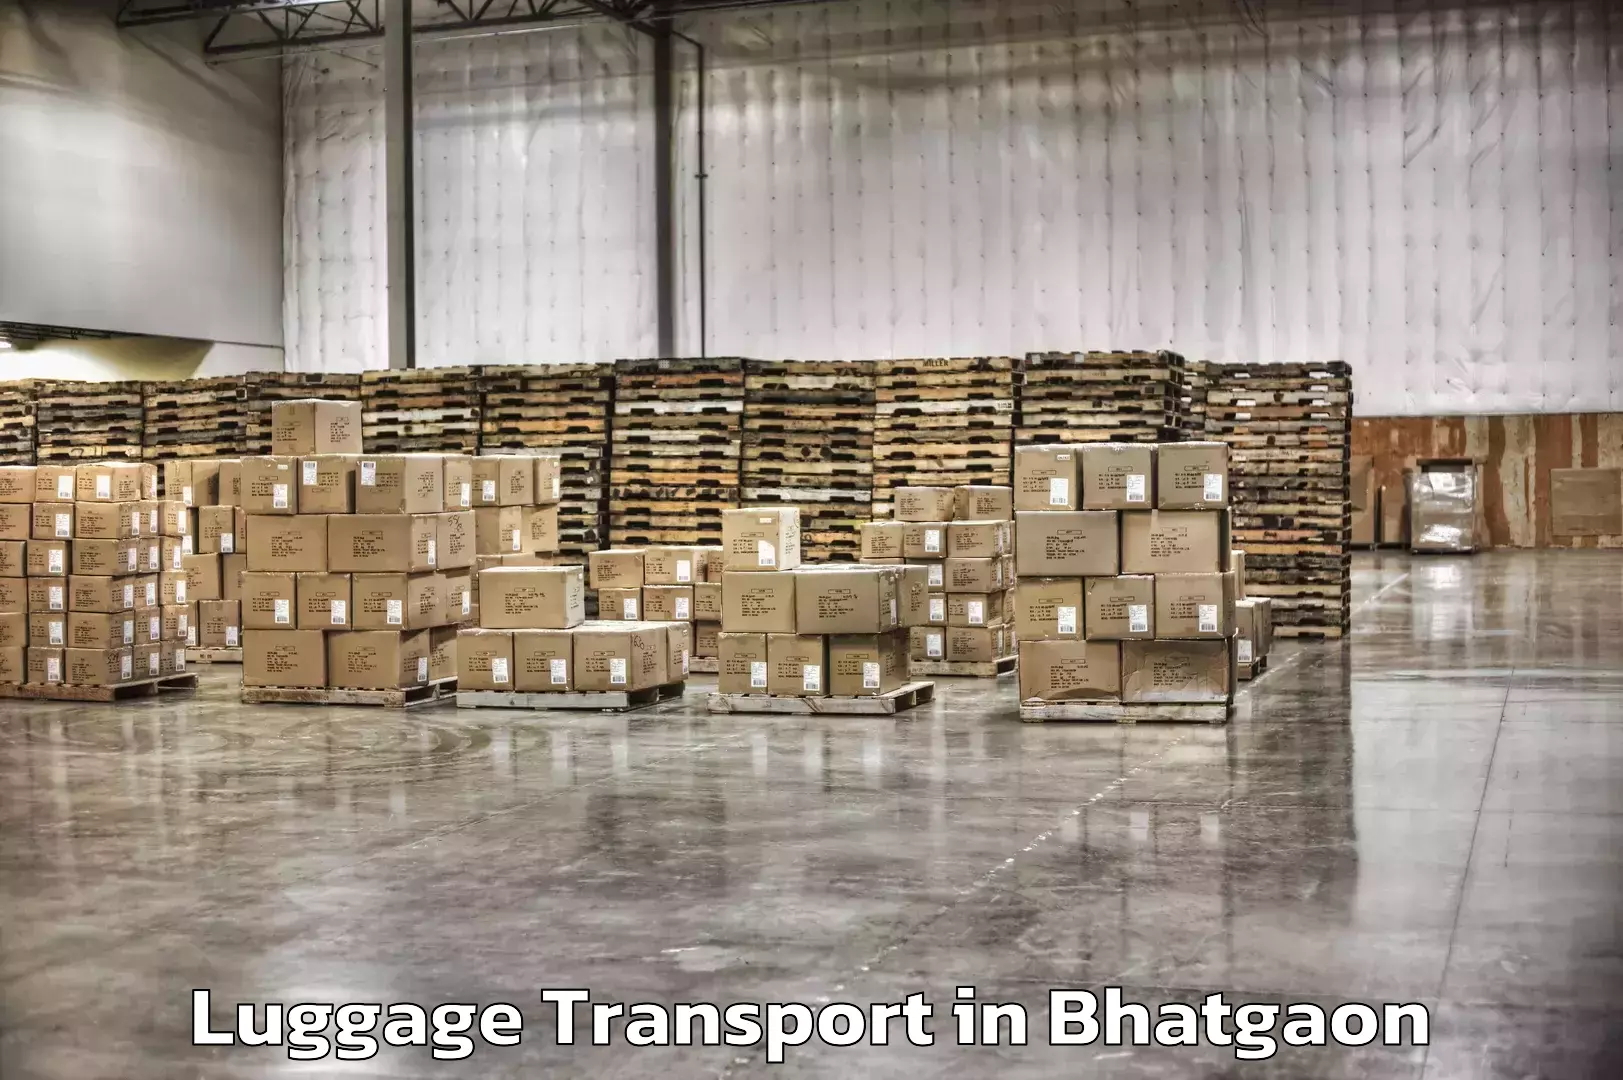 Luggage shipping discounts in Bhatgaon